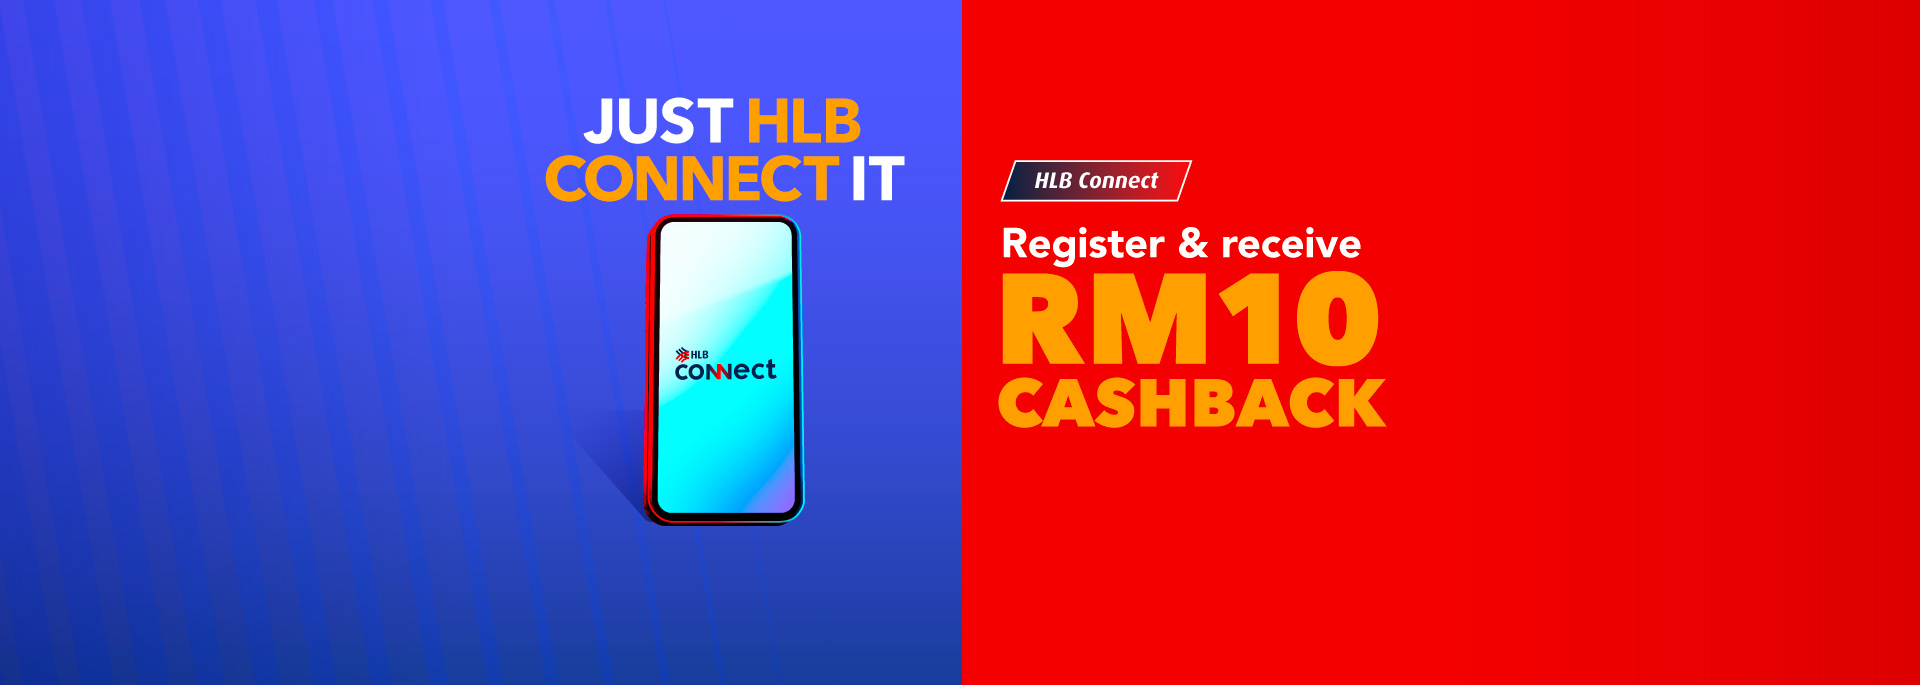 Register HLB Connect and receive RM10 Cashback